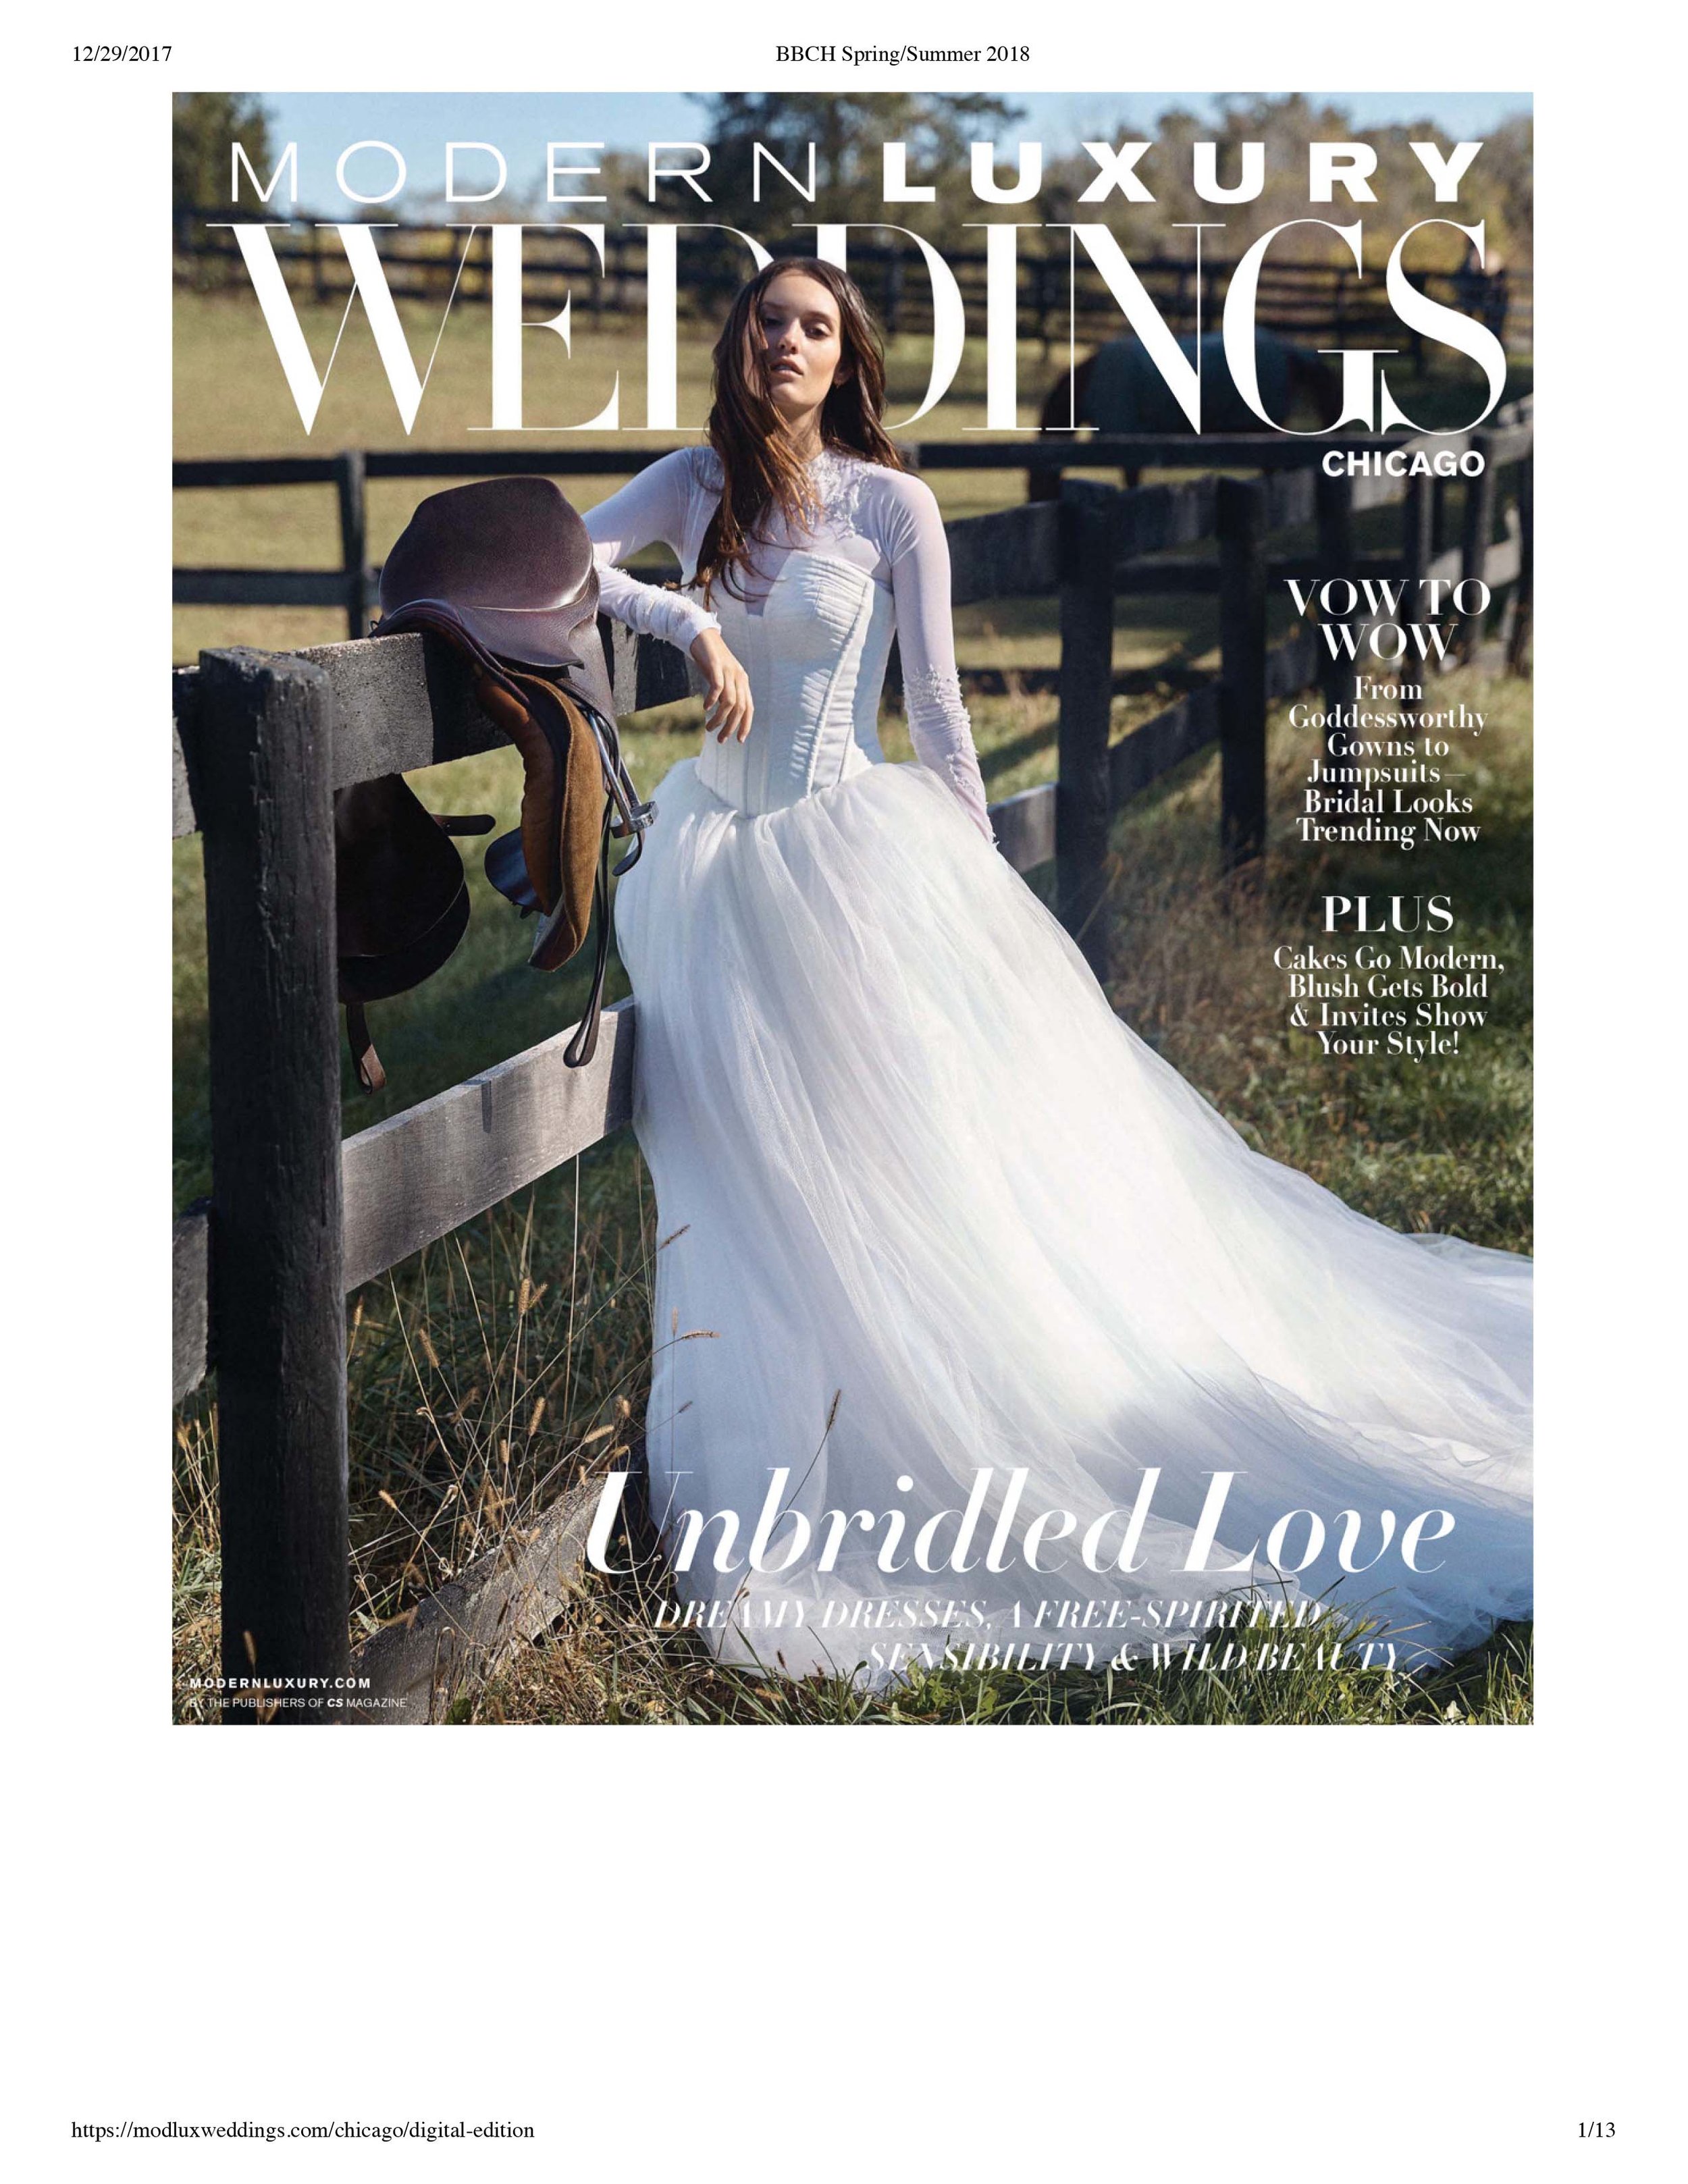 Luxury WEDDINGS Chicago Photographer - SS 2018 Issue - Rose Photo Complete Coverage-1.jpg